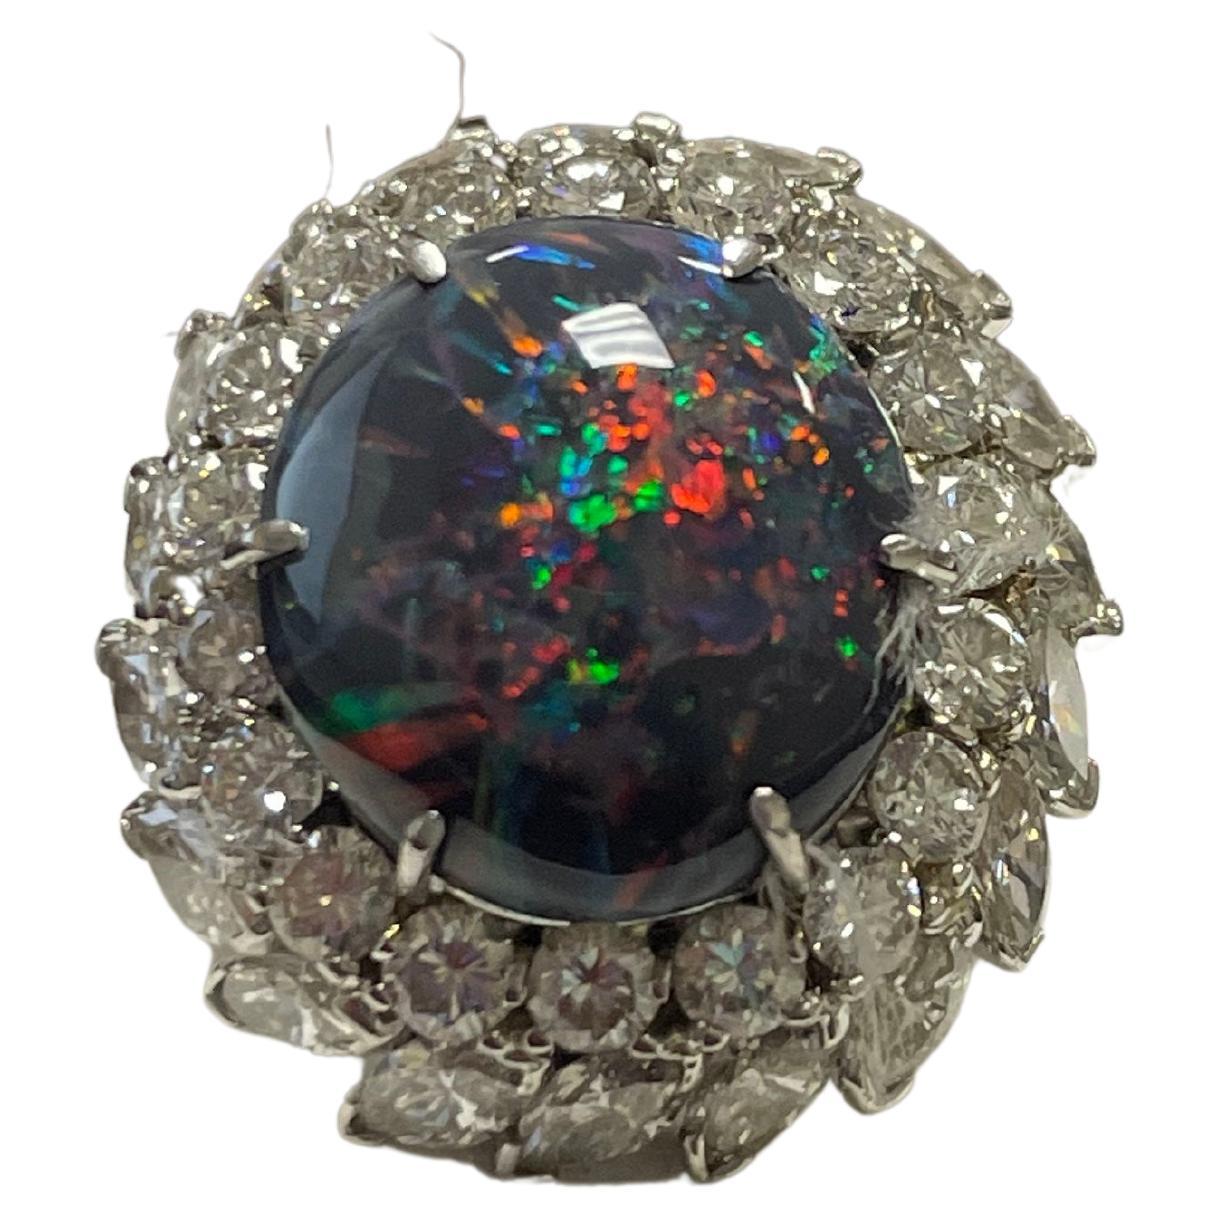 One Lady's Opal and Engagement Ring For Sale